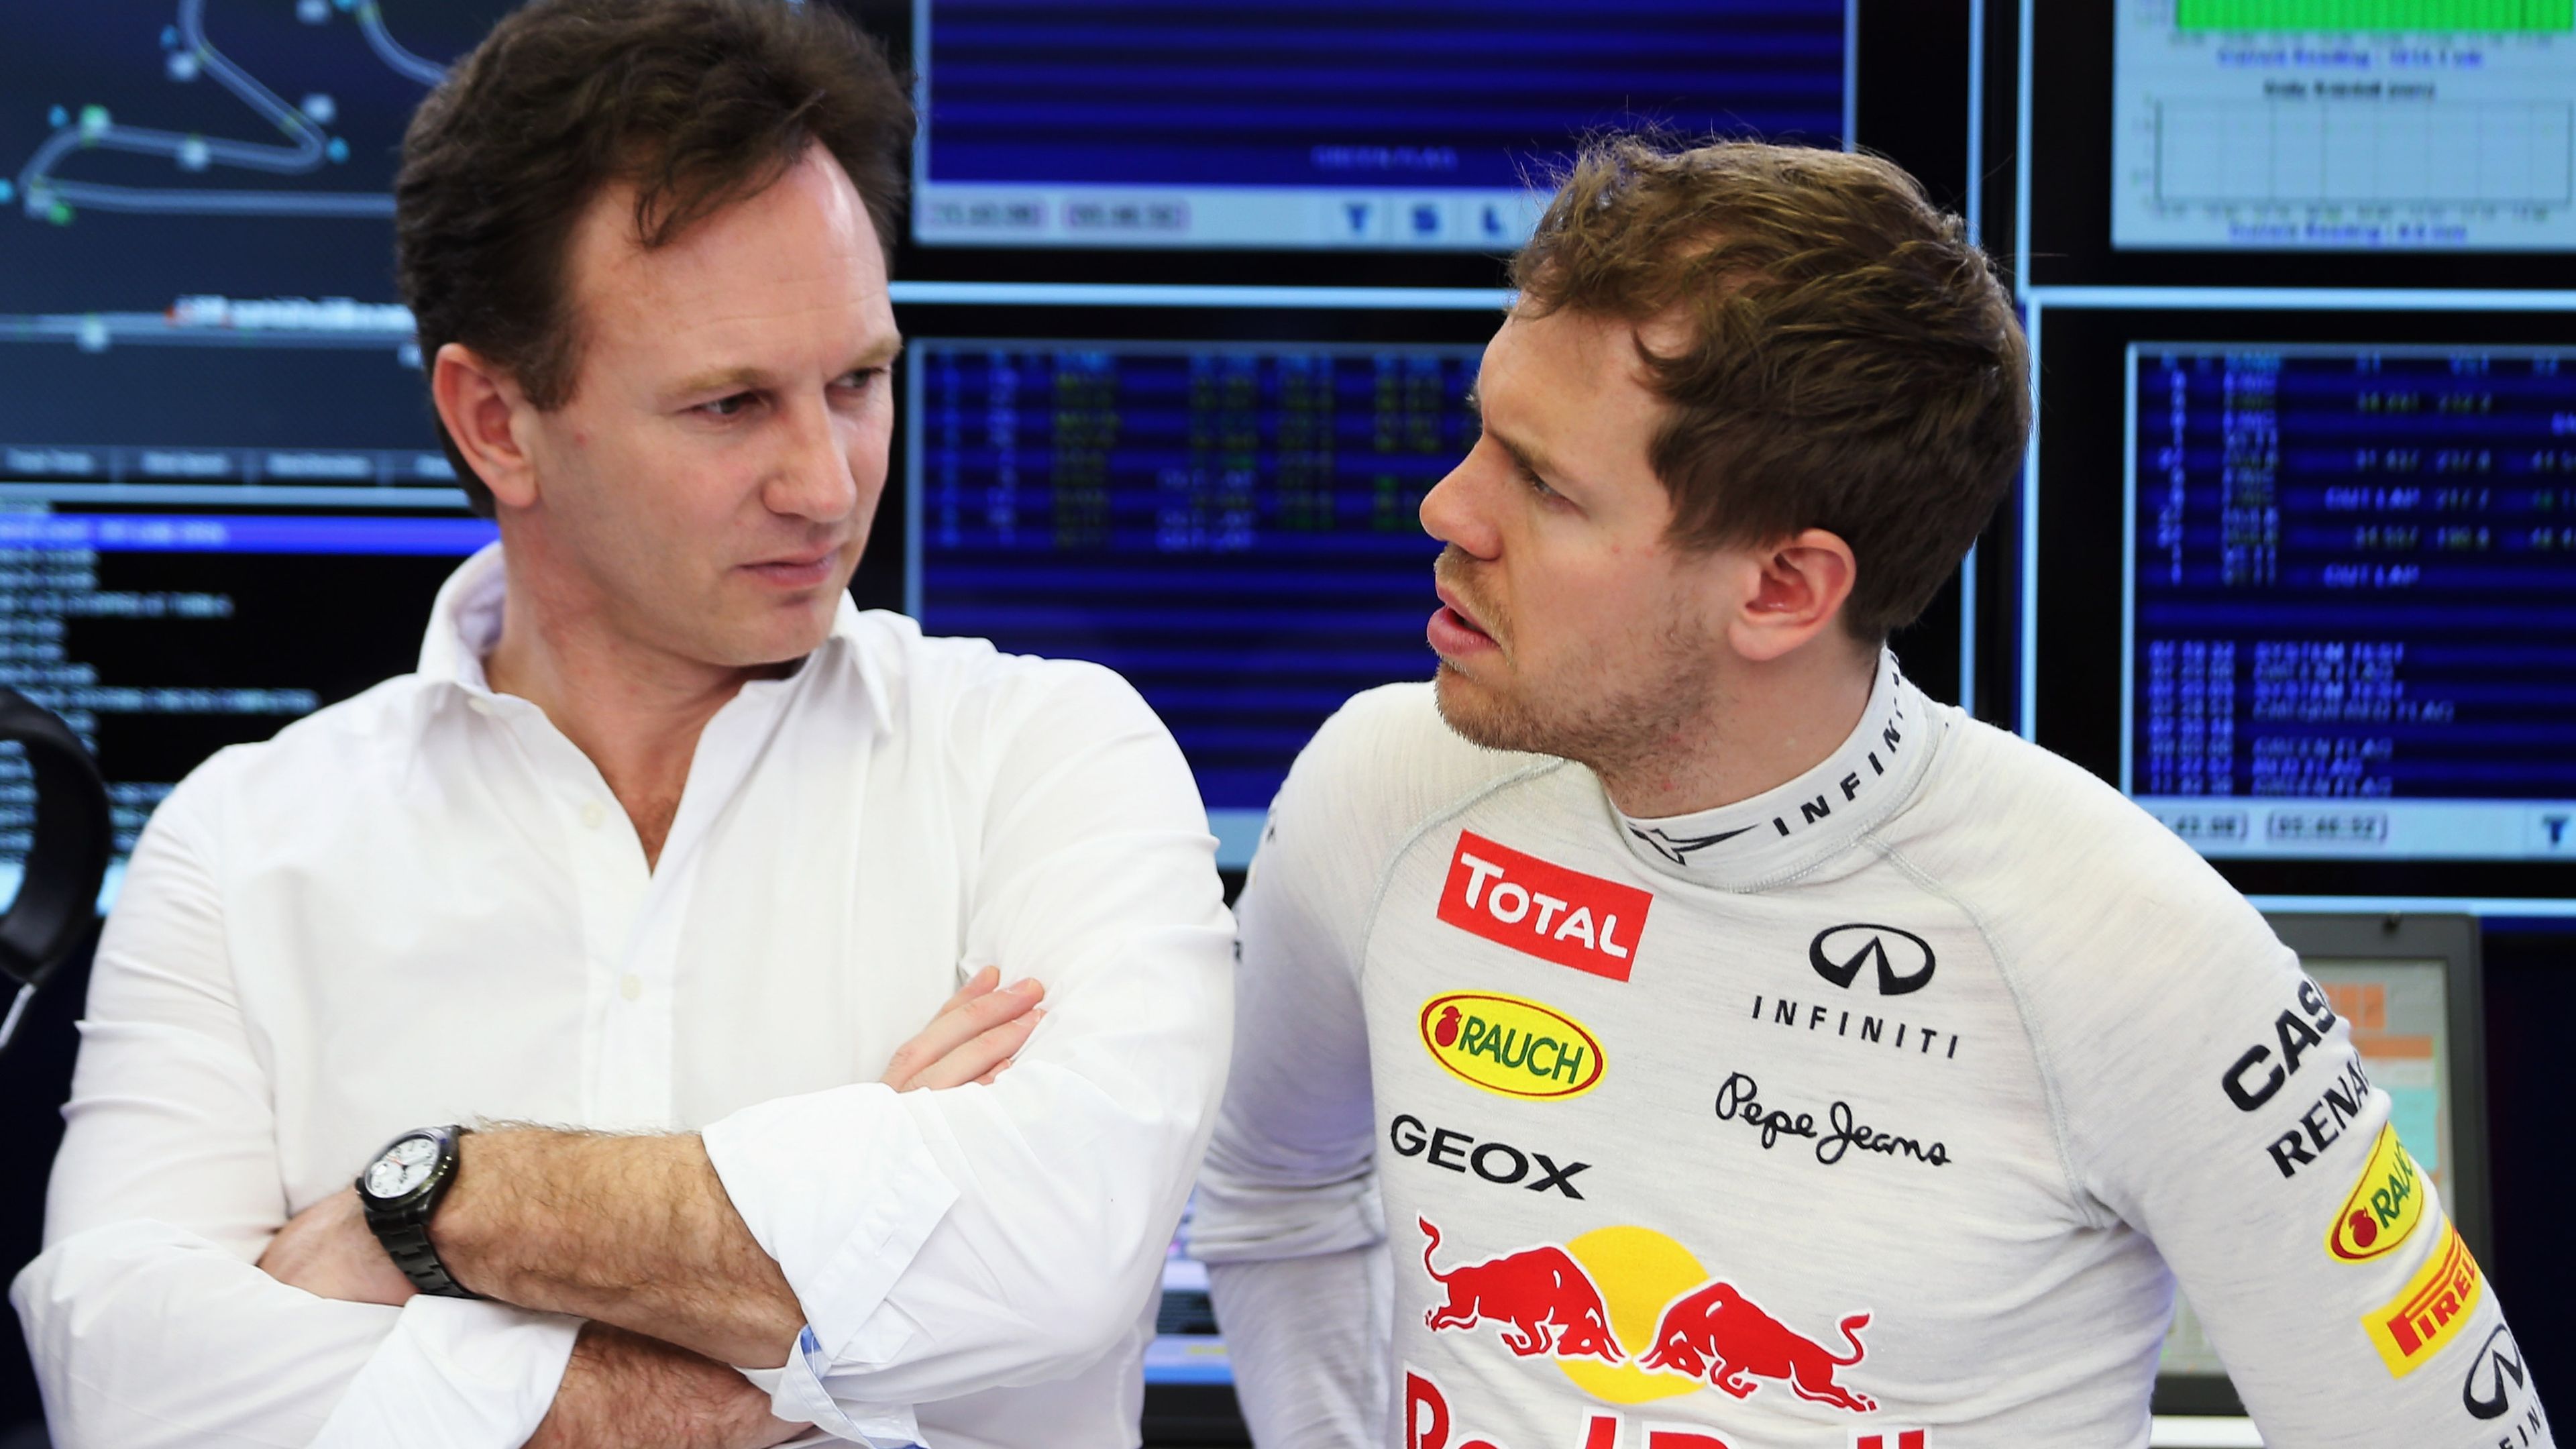 Christian Horner dismisses 'anonymous speculation' as texts leaked during F1 season opener